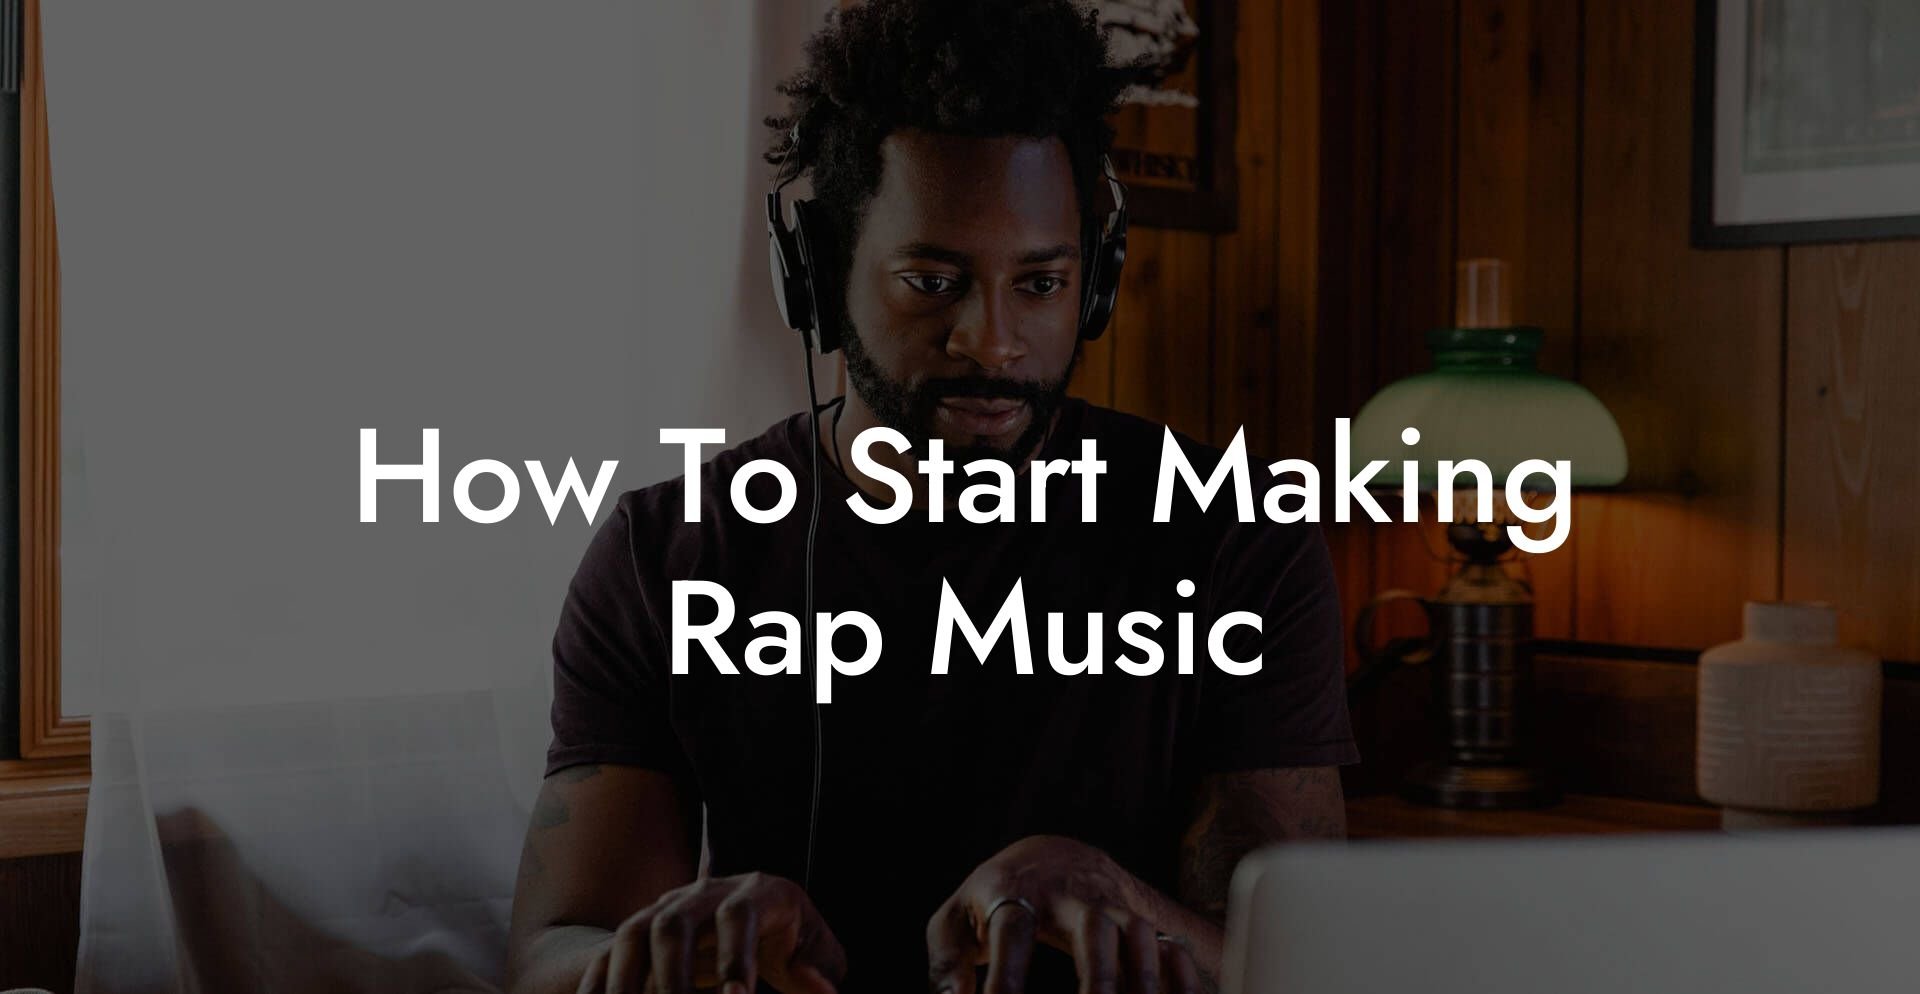 how to start making rap music lyric assistant